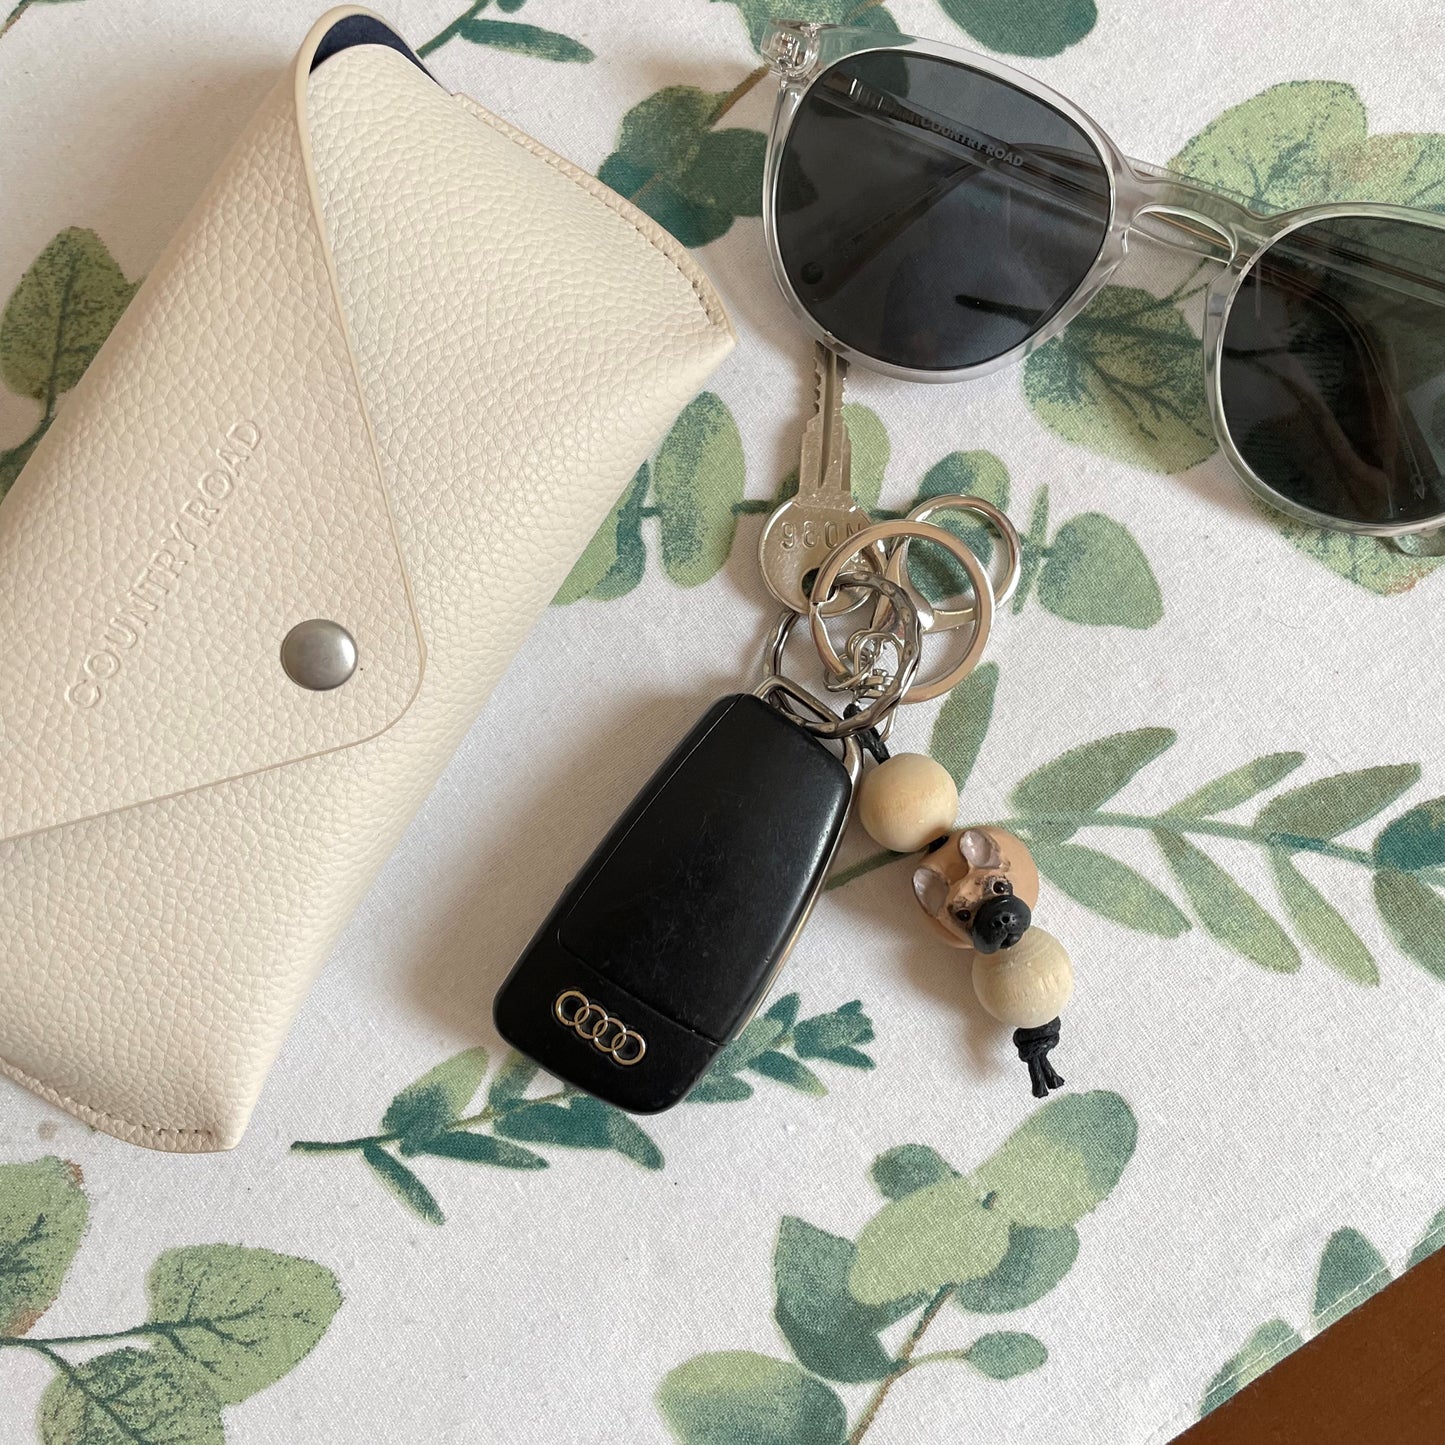 Handmade timber and polymer clay french bulldog keychain on white tablecloth beside sunglasses